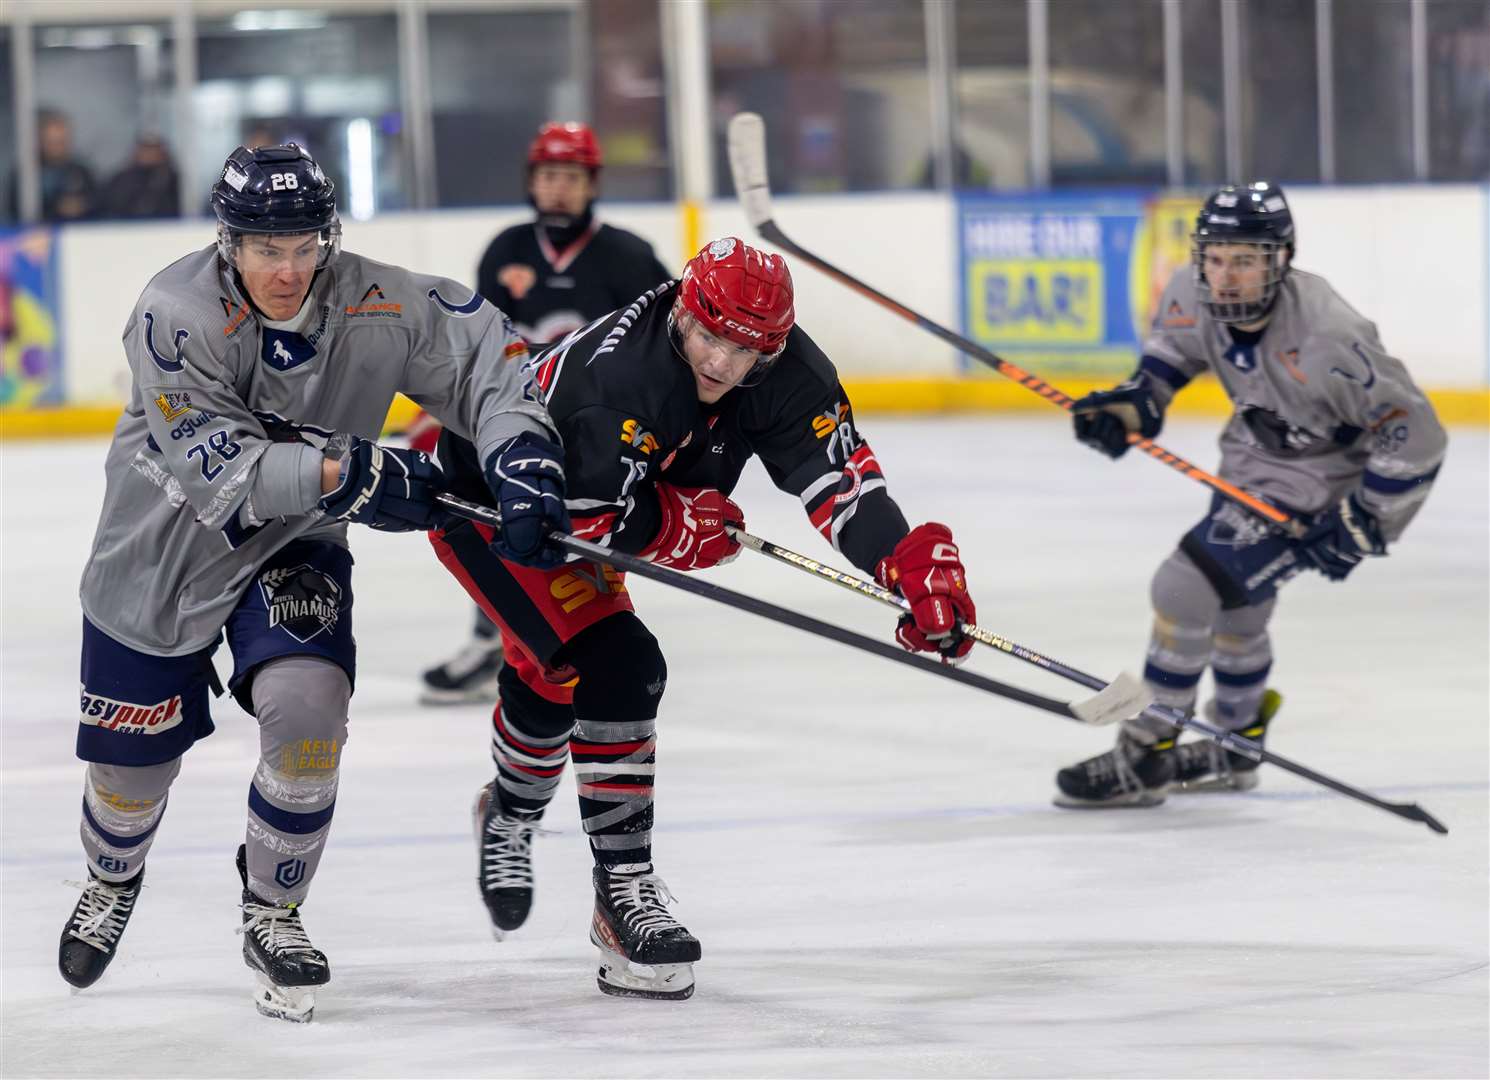 Invicta Dynamos’ Mads Thune competes against Streatham Redhawks in the Southern Cup semi-final Picture: David Trevallion